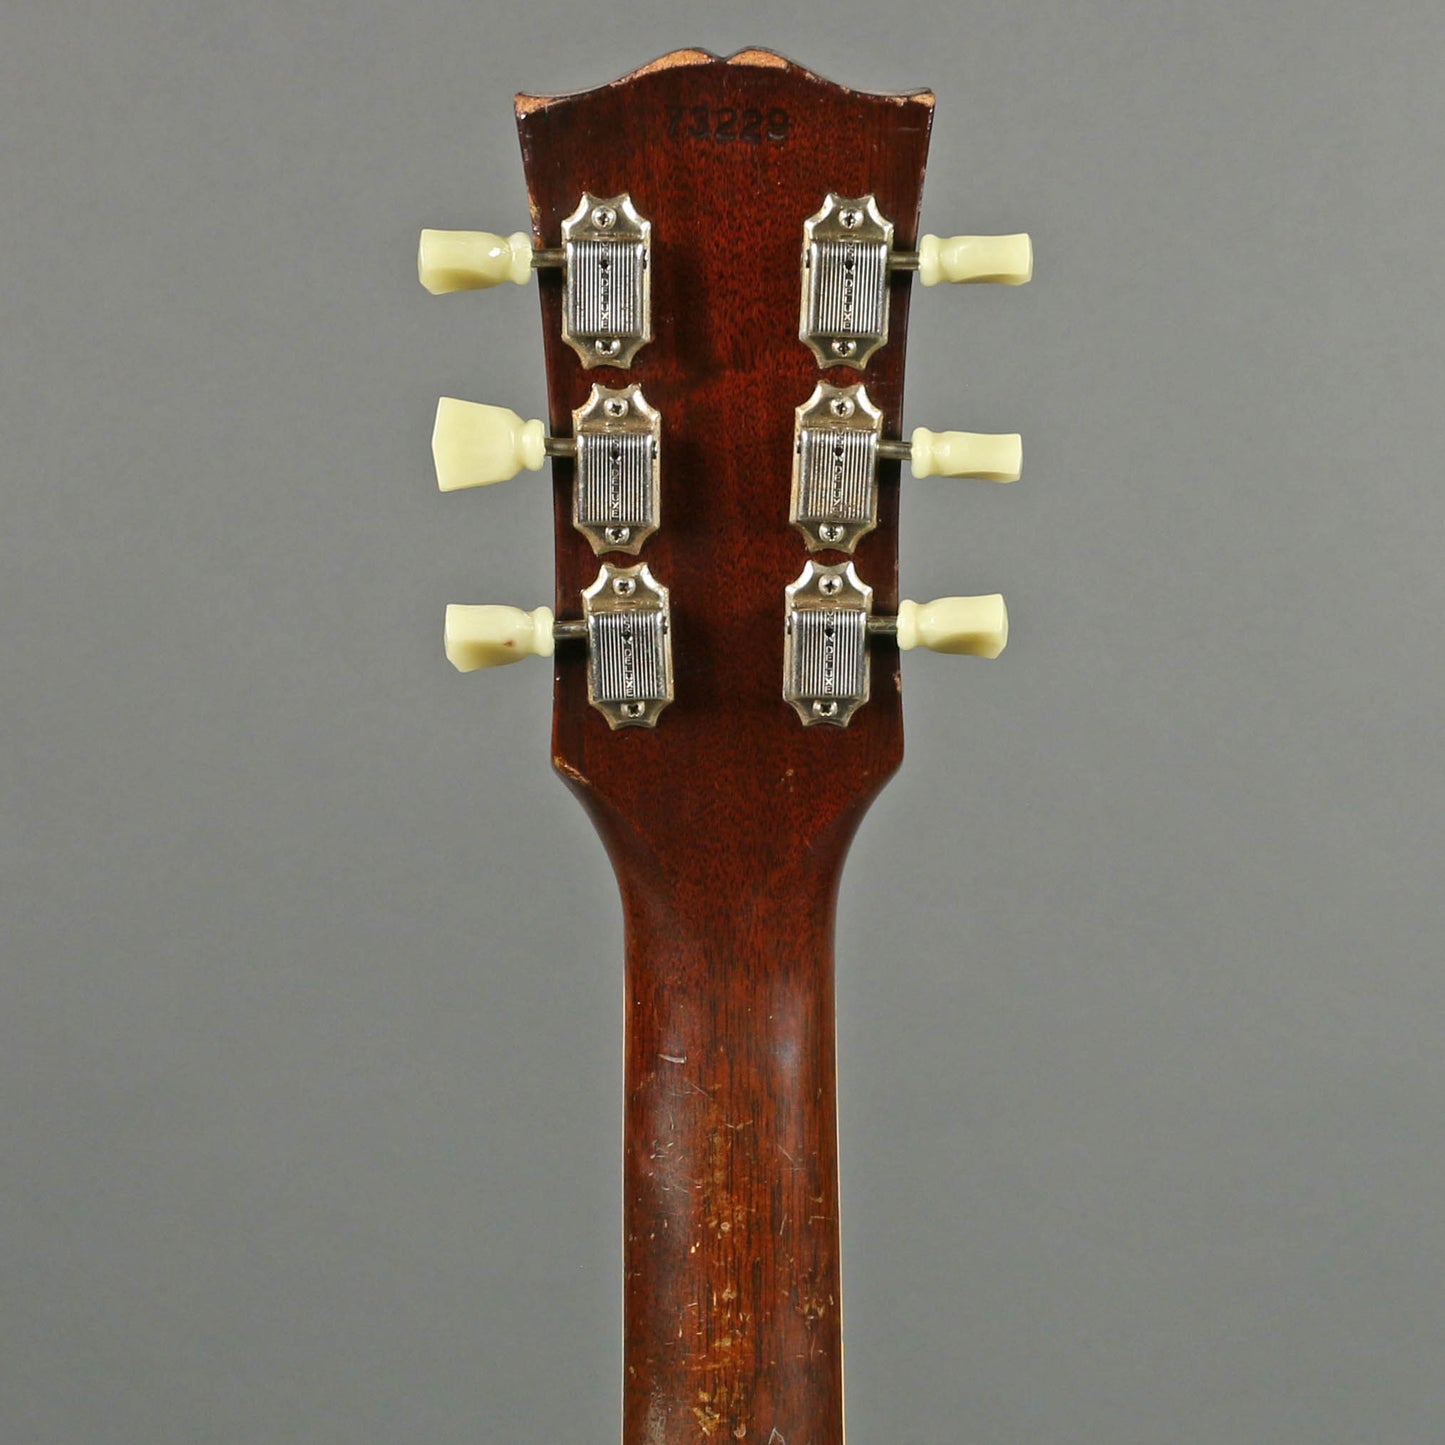 *HOLD* 1962 Gibson ES-175D